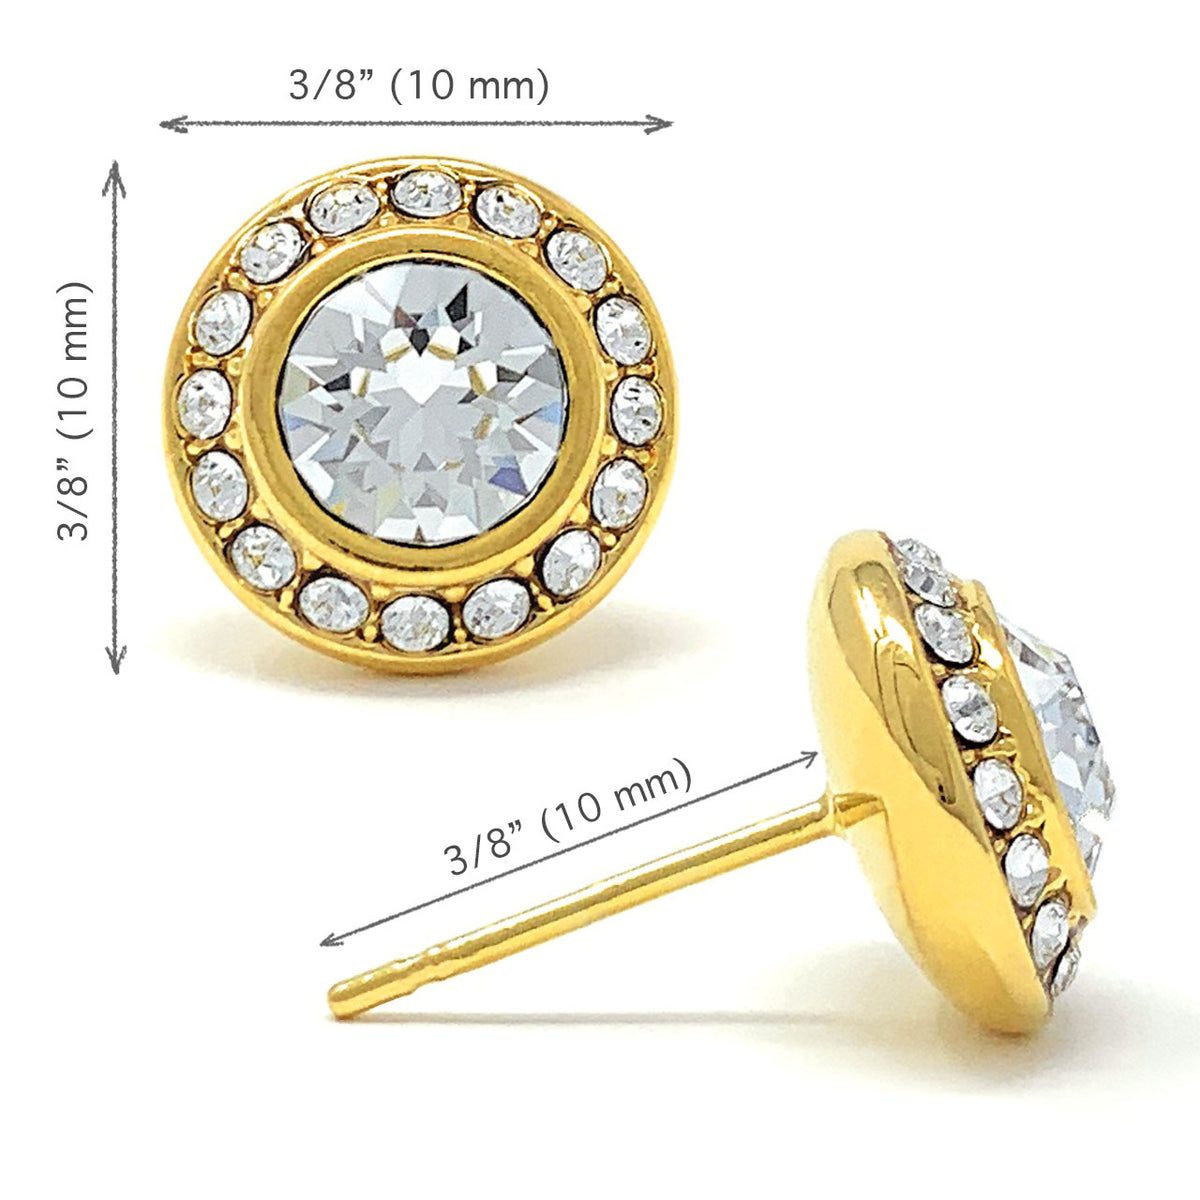 Halo Pave Stud Earrings with White Clear Round Crystals from Swarovski Gold Plated - Ed Heart